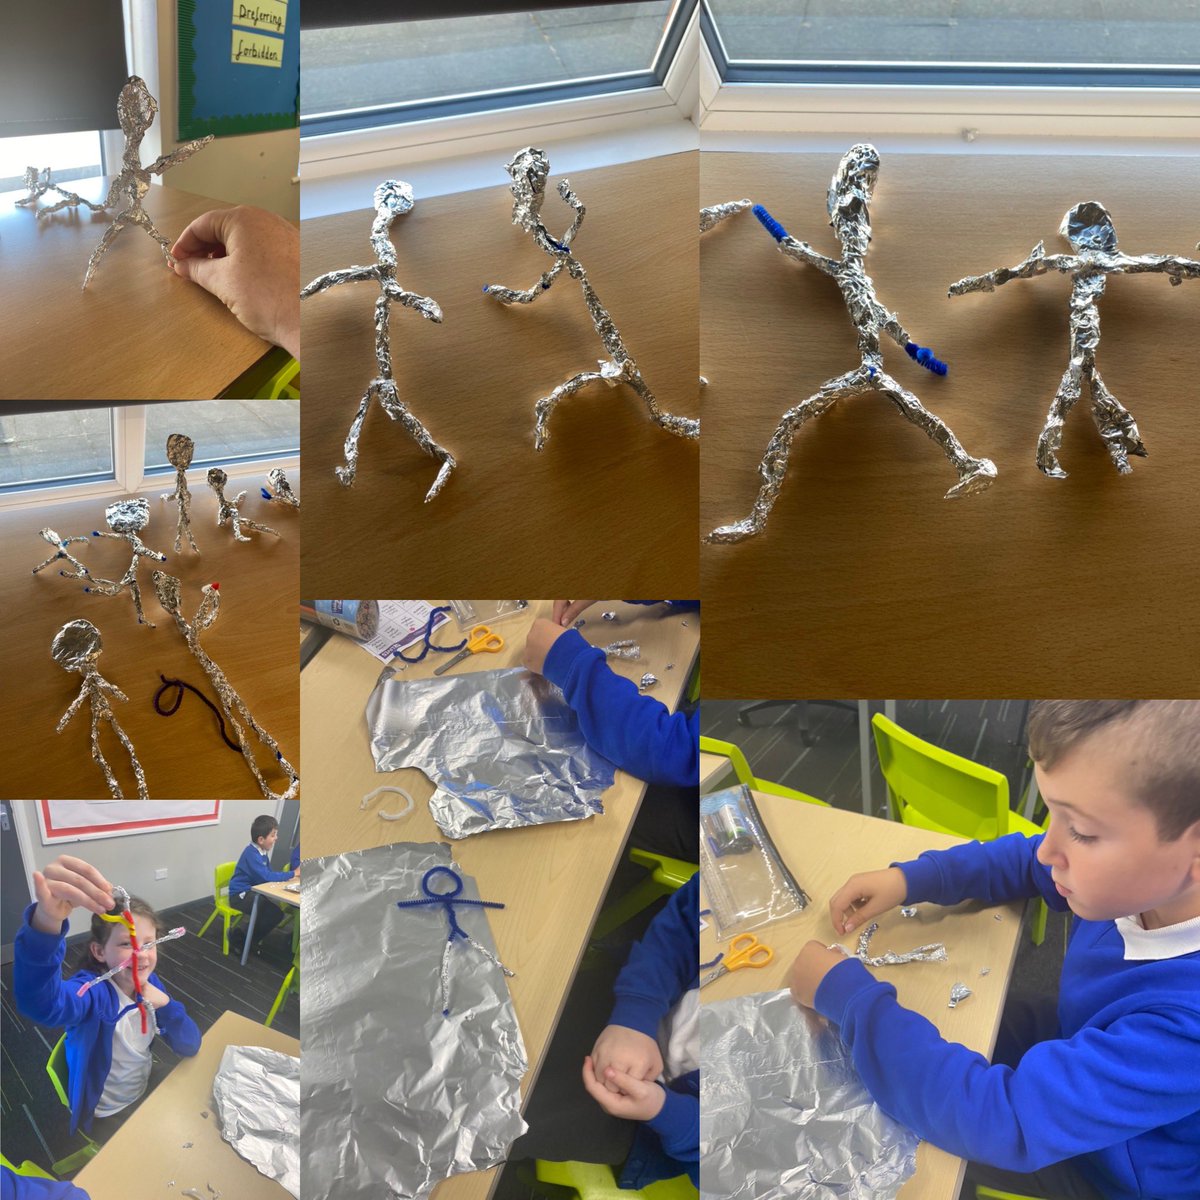 We are showing our #weareresilient skills when creating our iron men. Progress photos to follow 😊